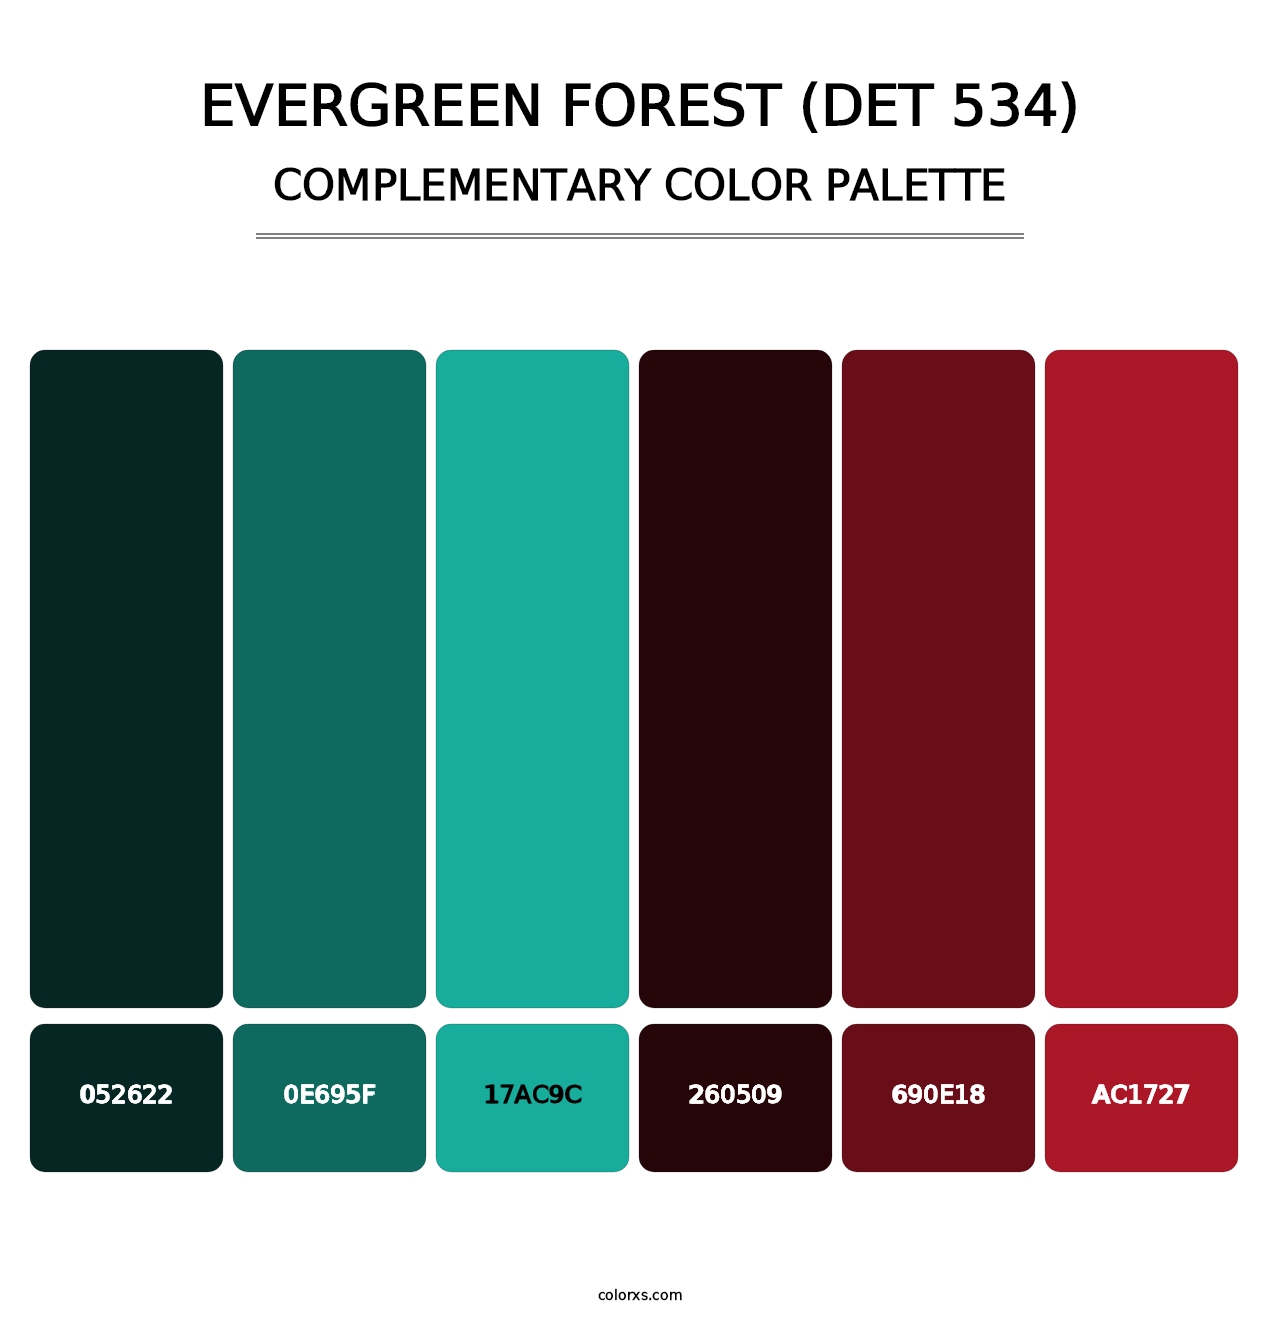 Evergreen Forest (DET 534) - Complementary Color Palette